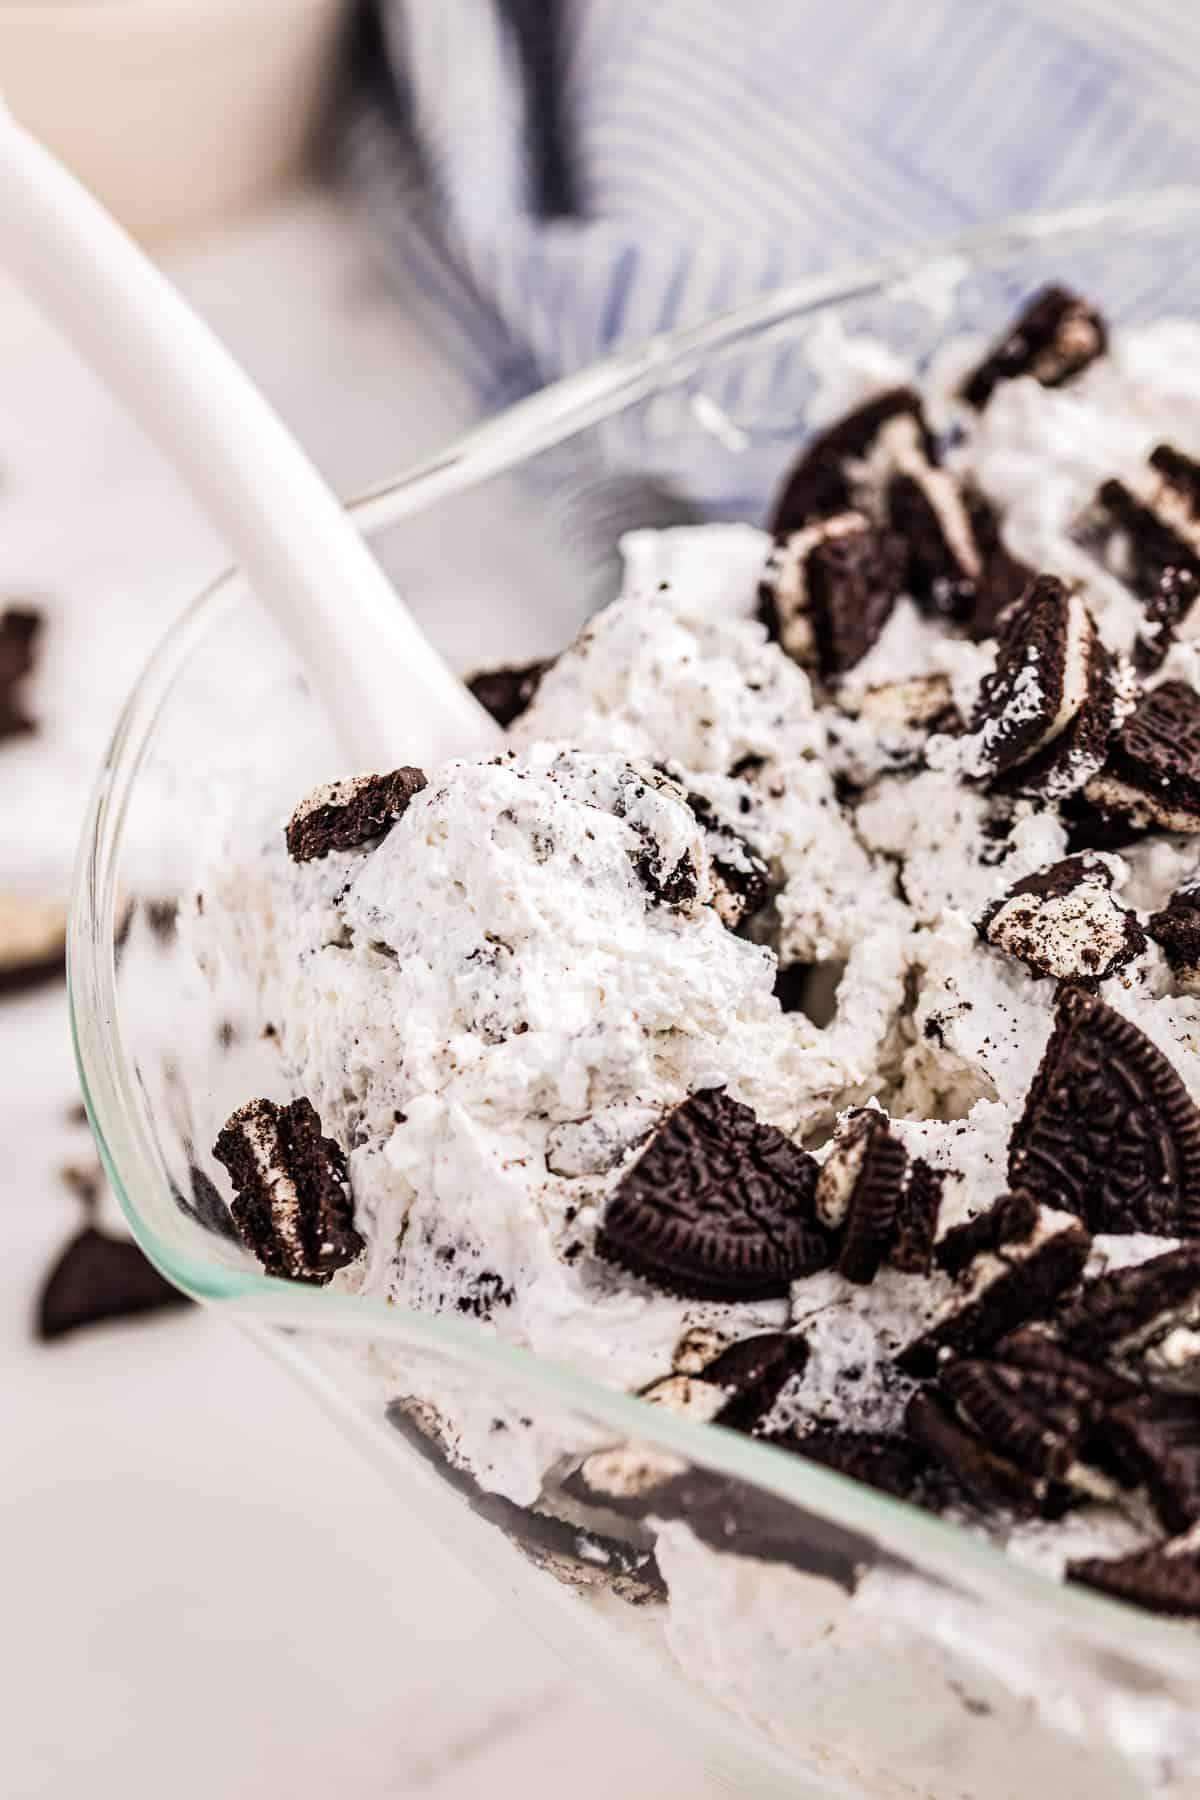 A spoon taking Oreo Salad out of glass bowl